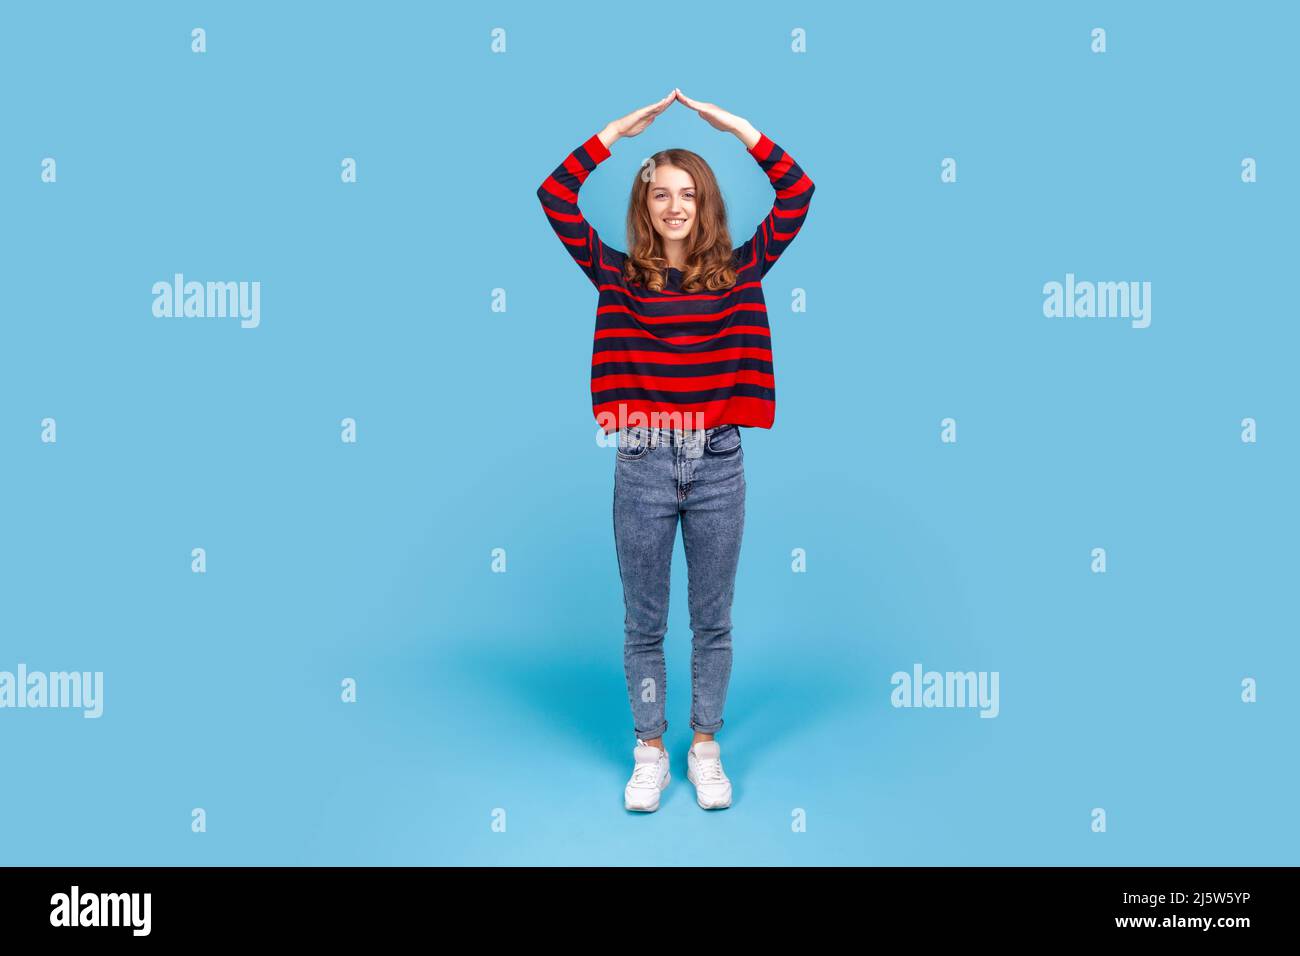 Full length portrait of smiling friendly woman, doing house roof gesture over head, feeling herself in safety, wearing striped casual style sweater. Indoor studio shot isolated on blue background. Stock Photo